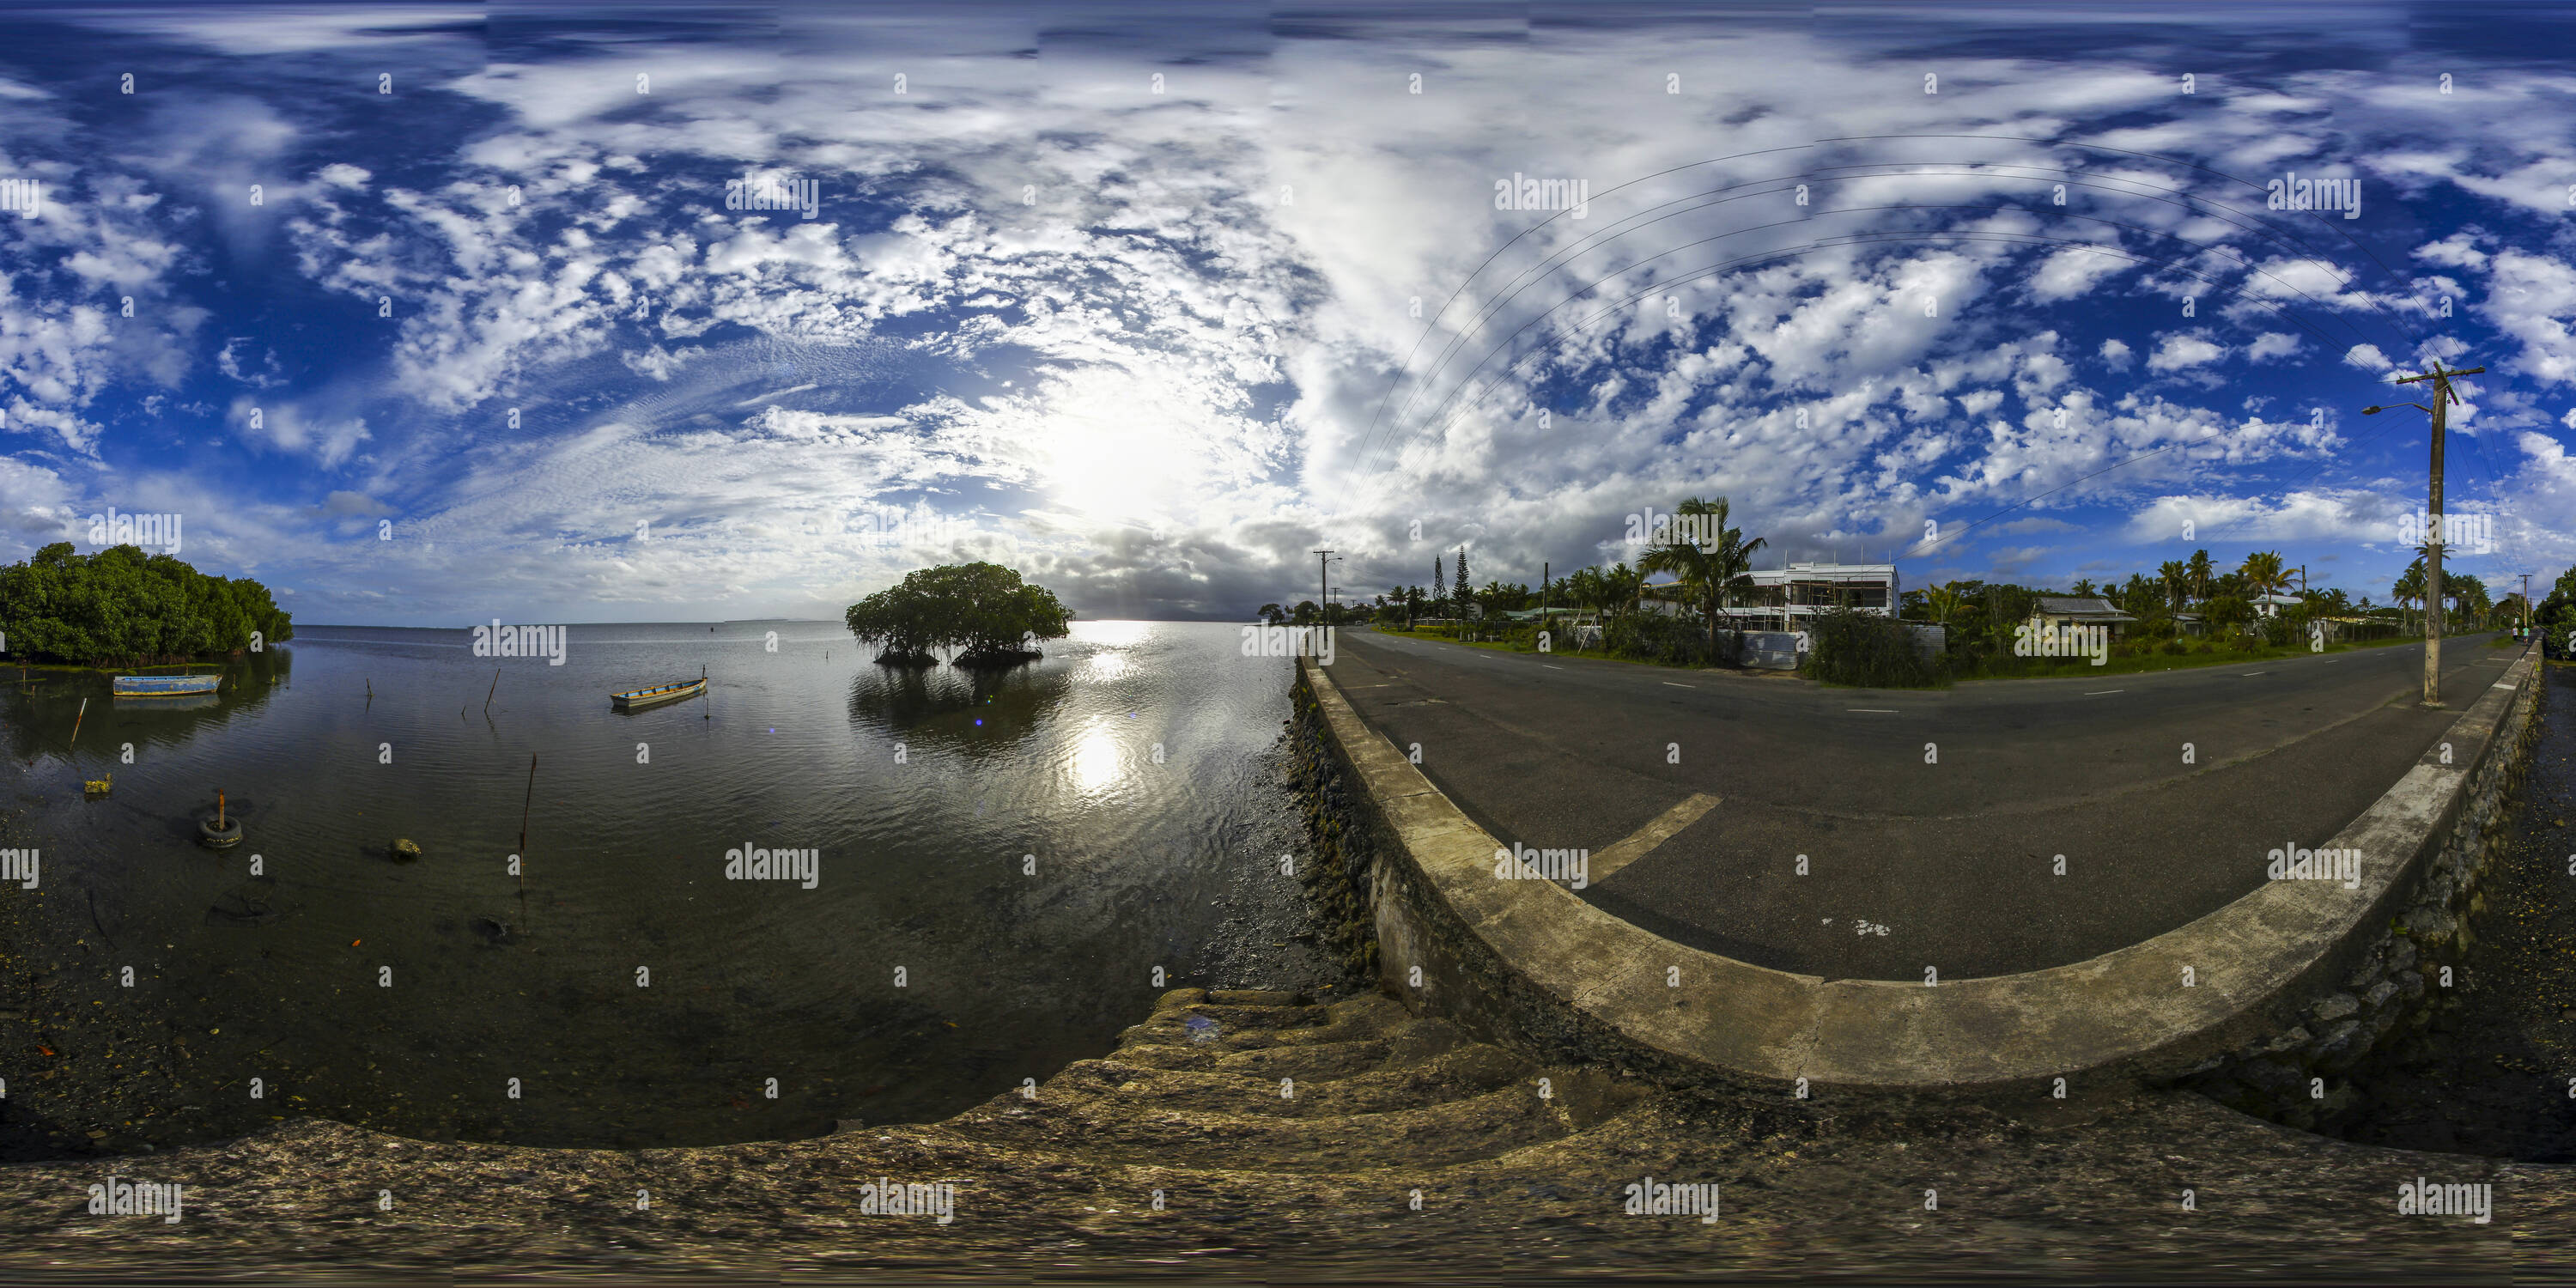 360 degree panoramic view of Mangroves at the southern end of the Suva peninsula